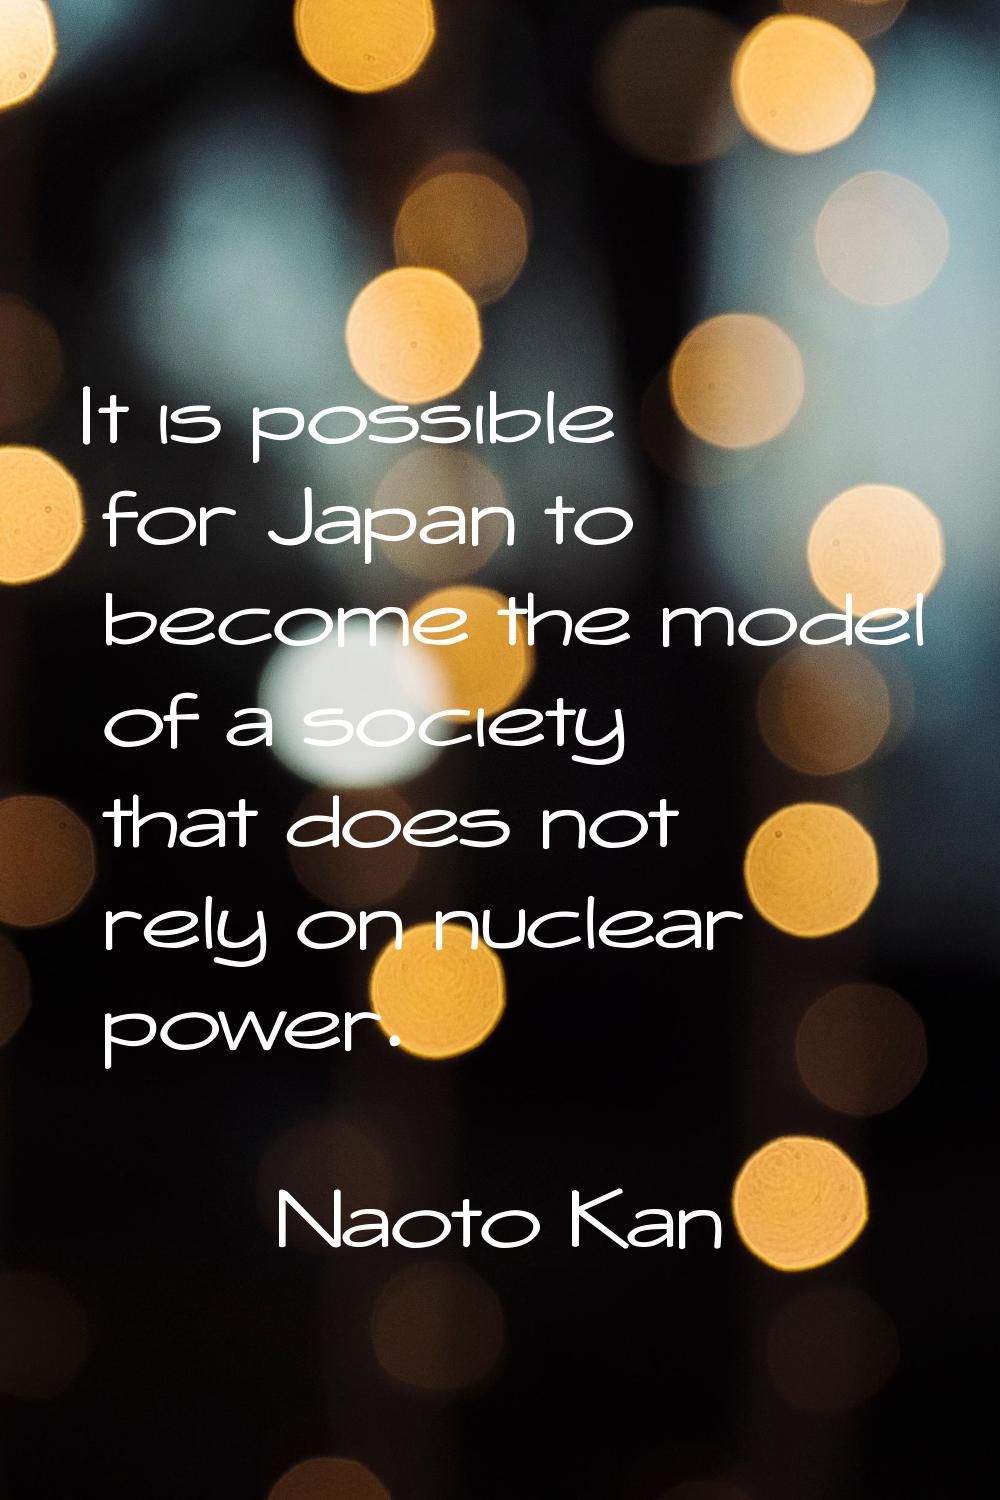 It is possible for Japan to become the model of a society that does not rely on nuclear power.